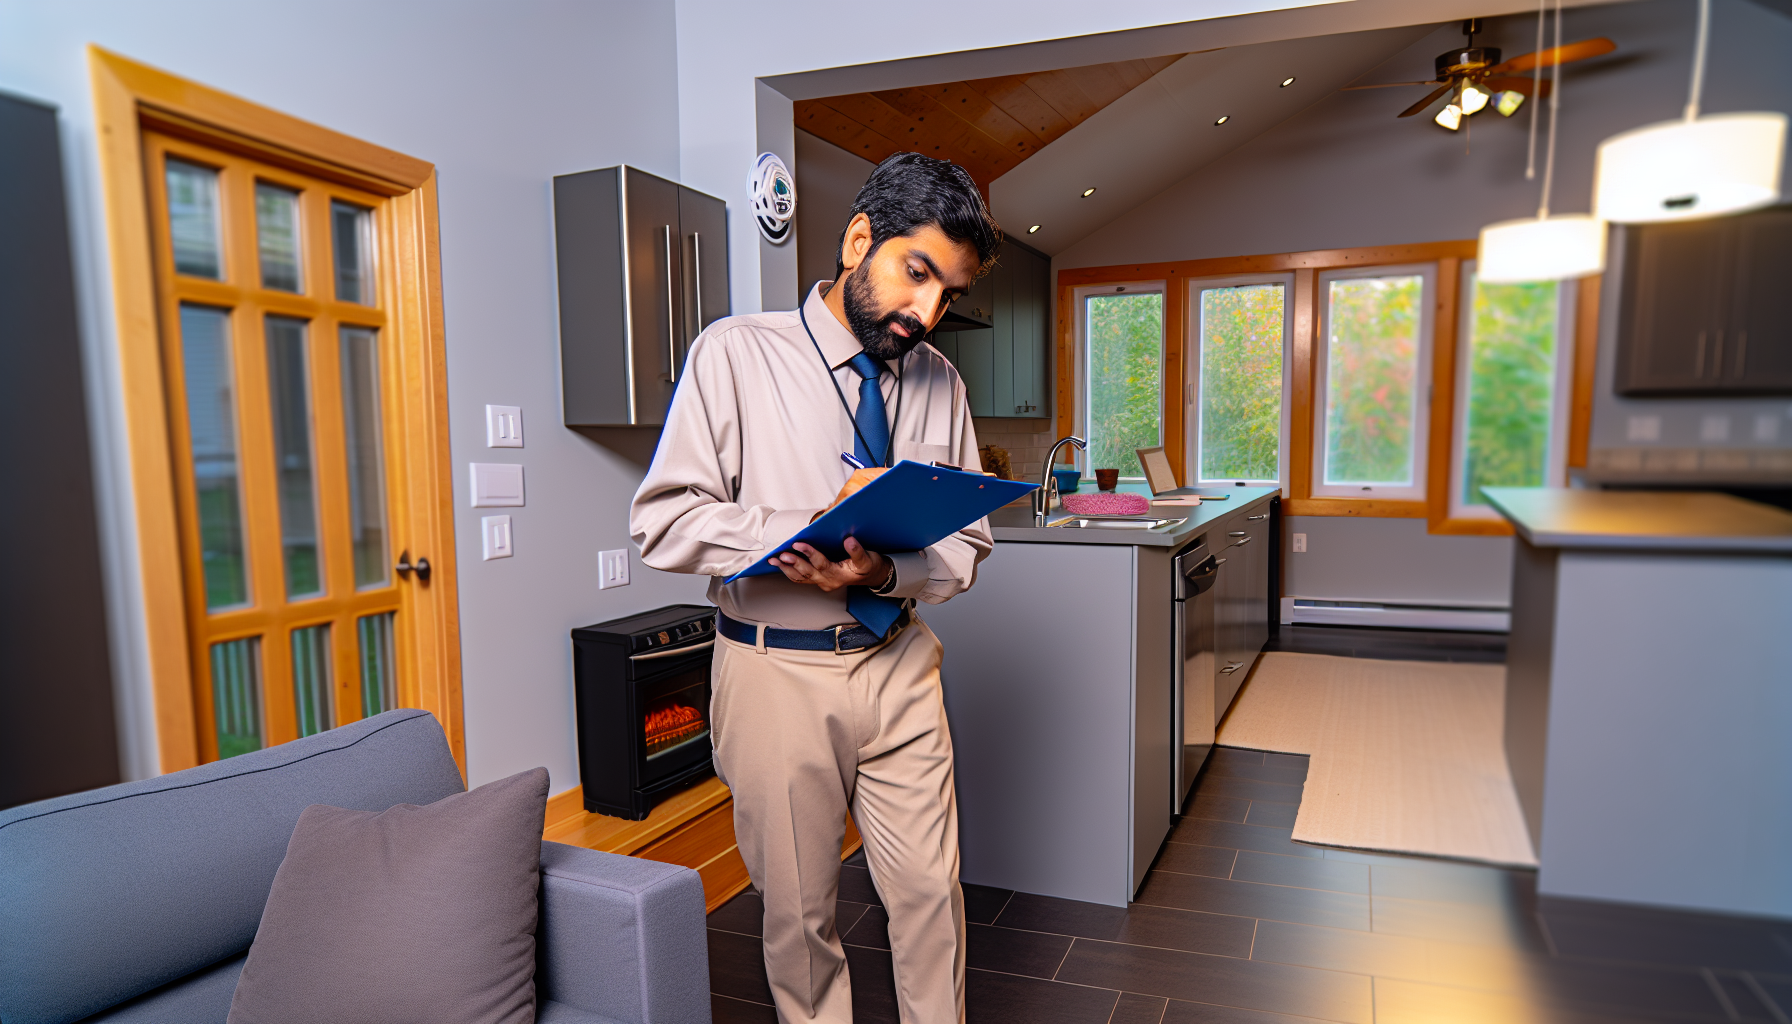 Energy assessor conducting an assessment in a house